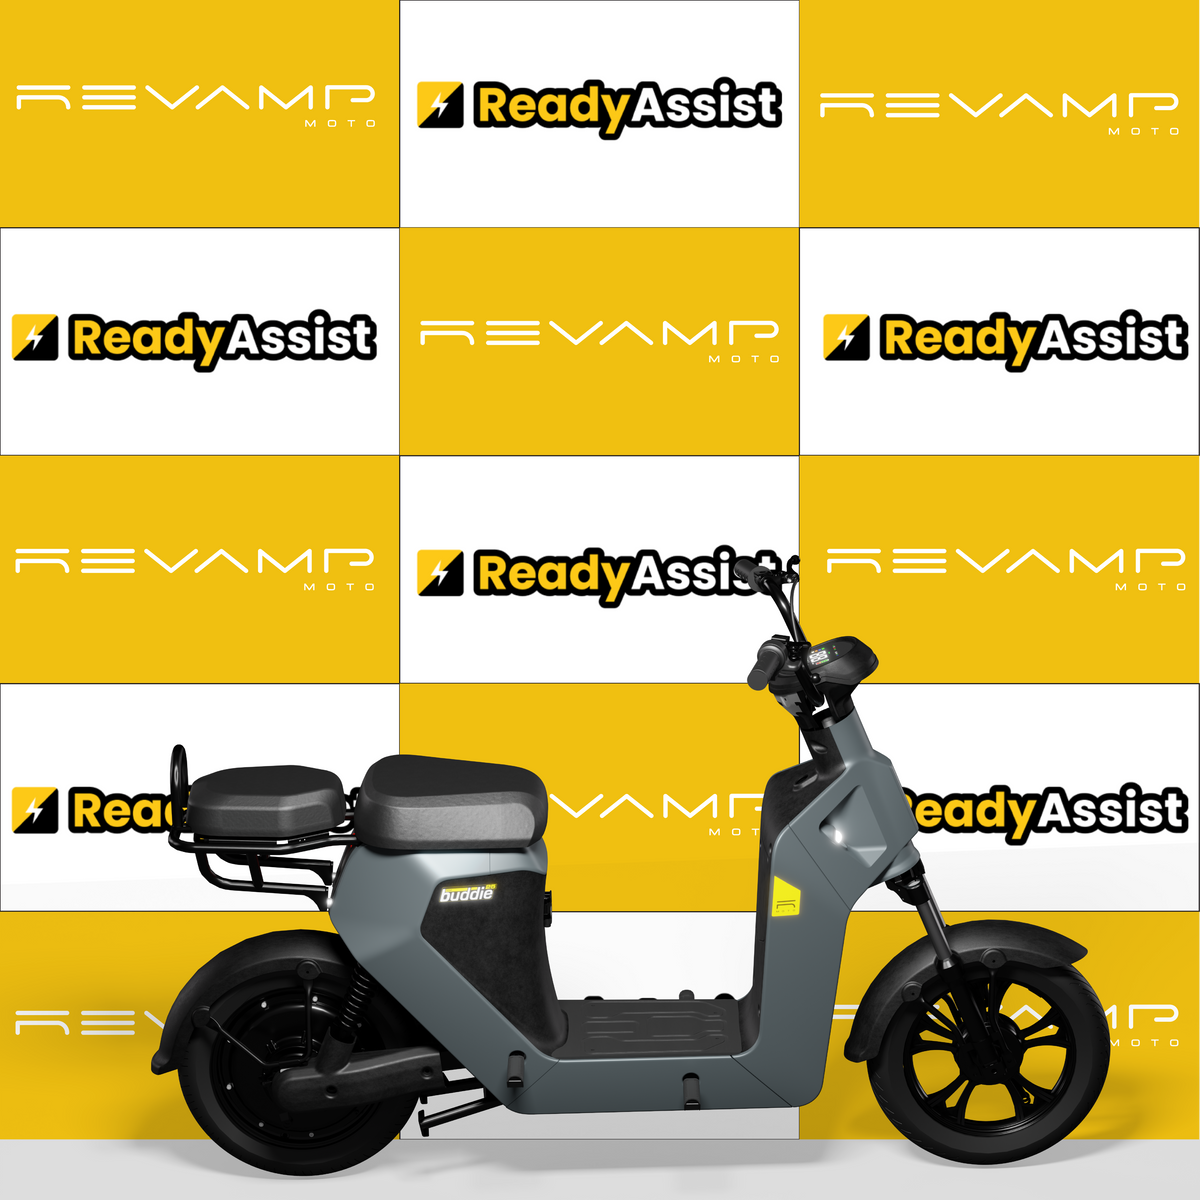 Revamp Moto Partners with ReadyAssist to Provide Unparalleled Roadside Assistance for Electric Two-Wheelers